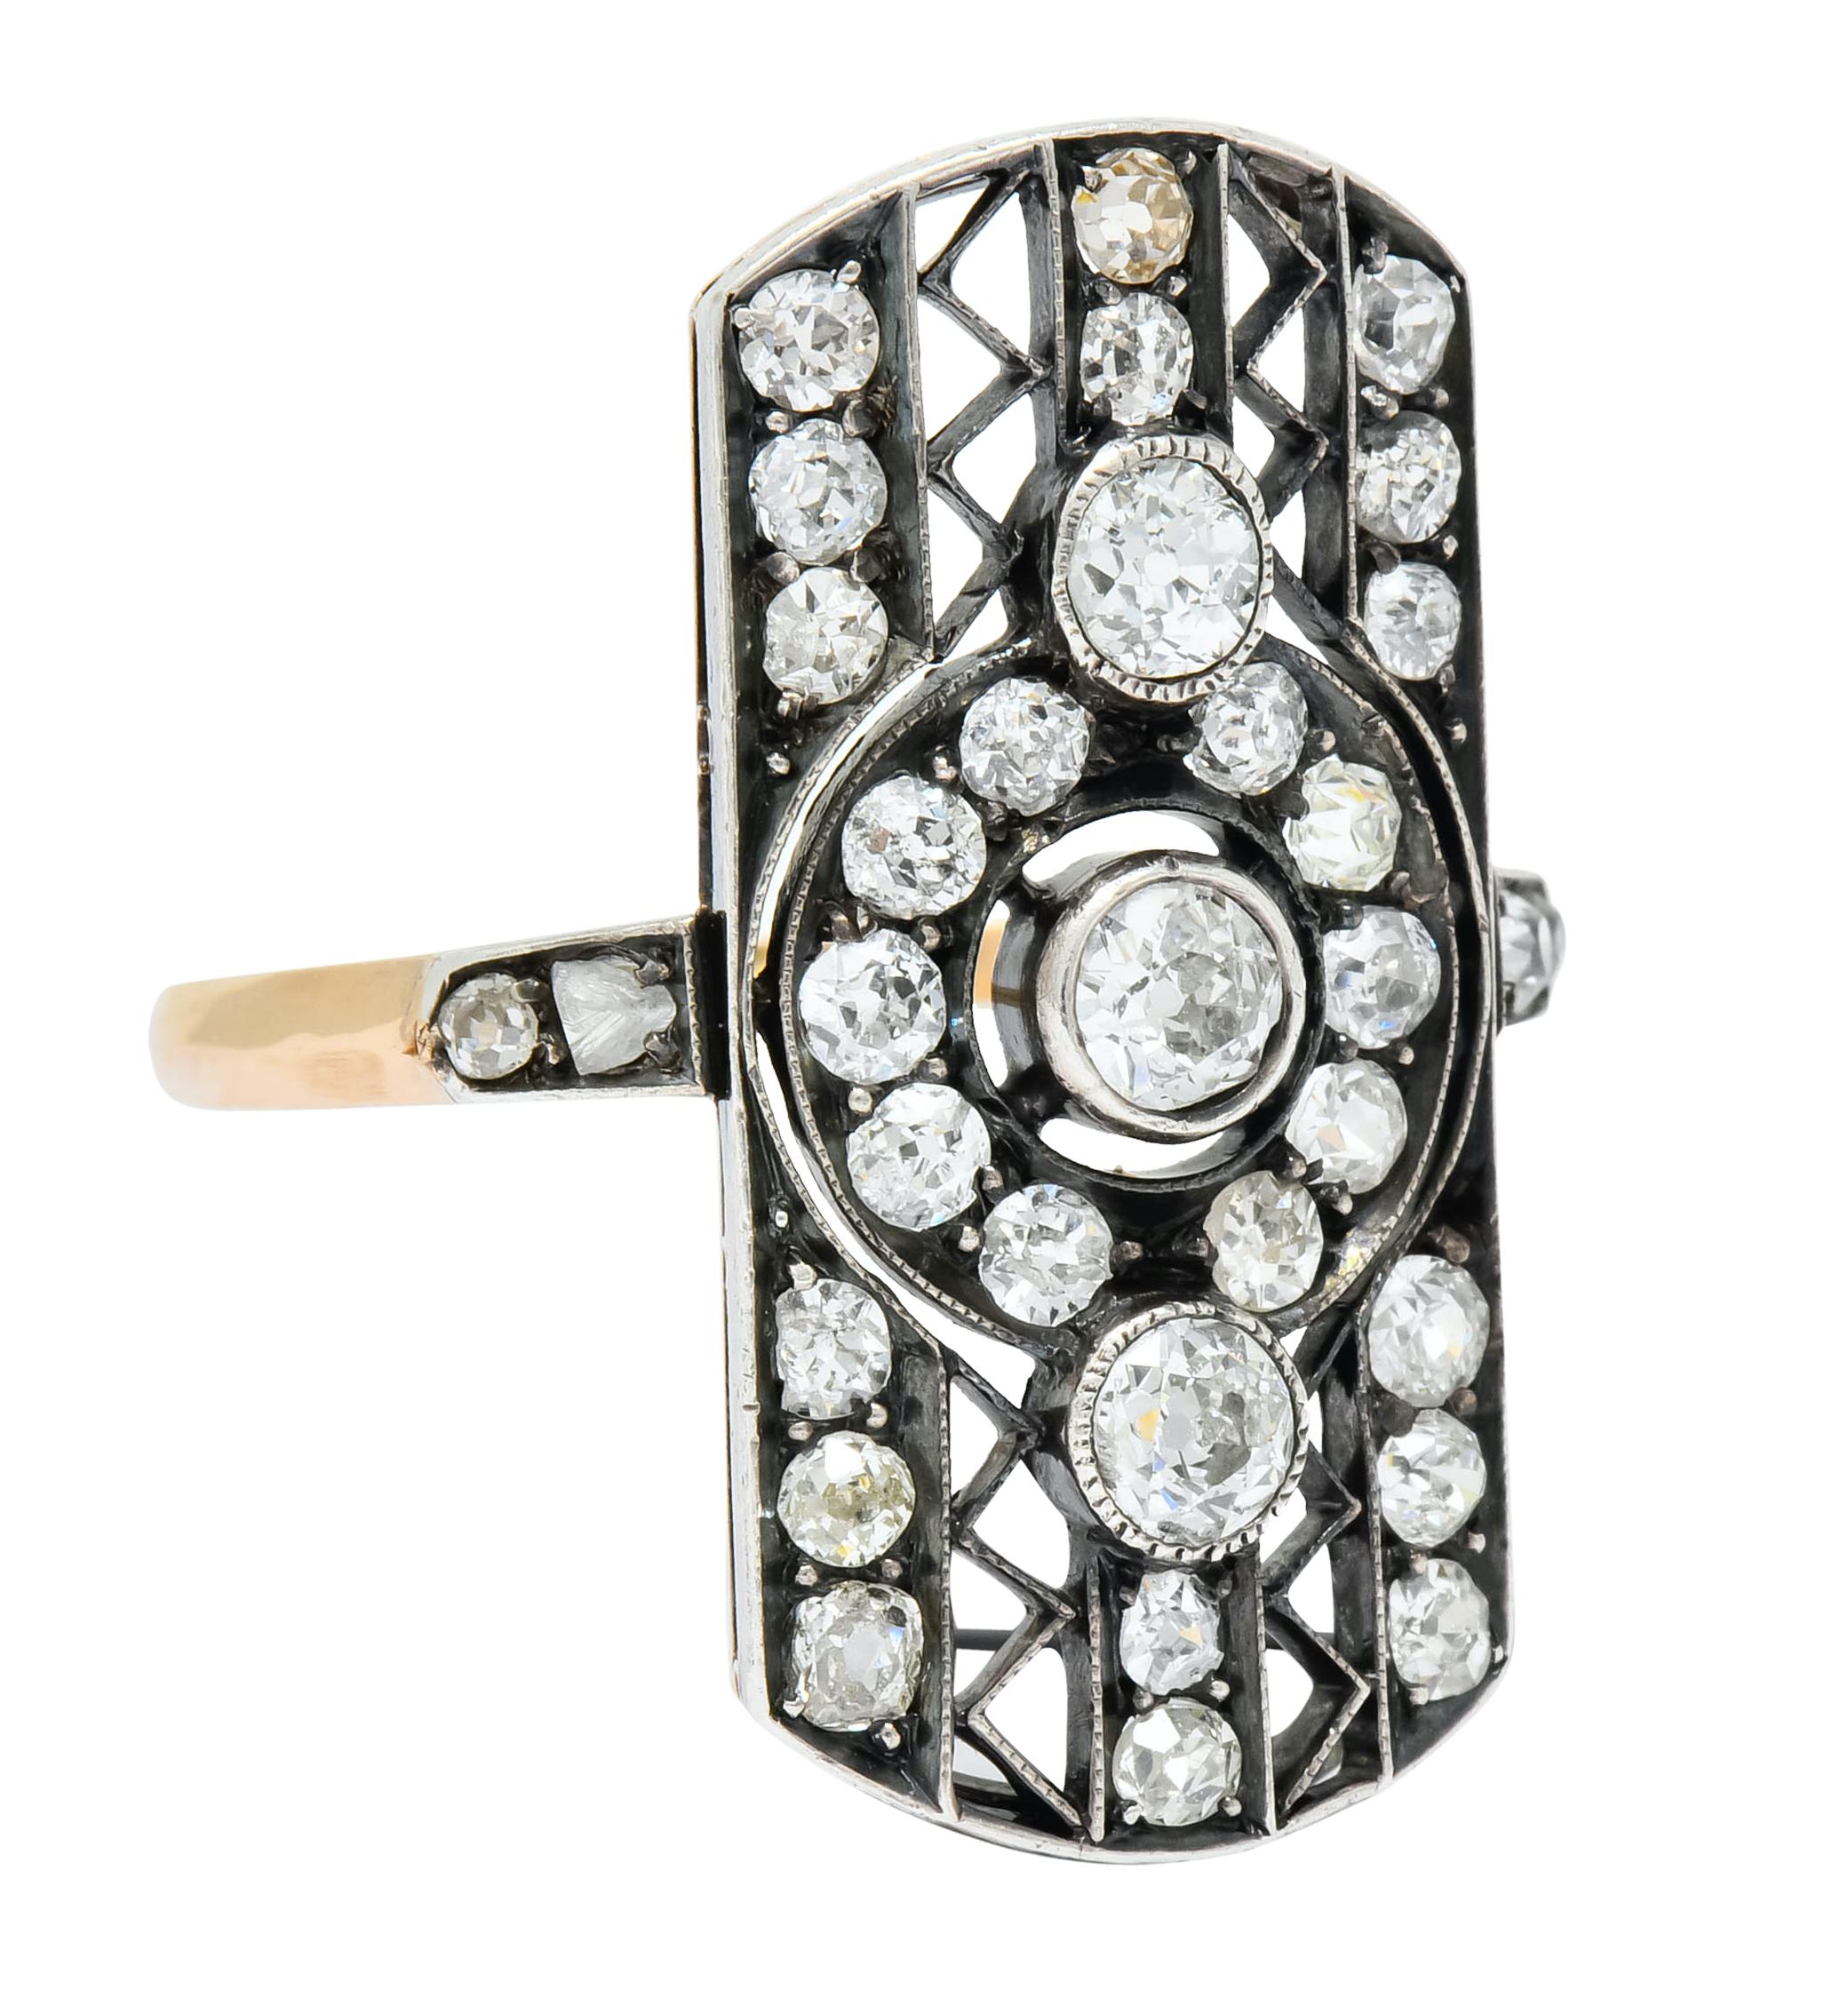 Dinner style ring designed as central circle flanked by pierced stripes featuring a zig zag motif

Centering three old mine cut diamonds, bezel set North to South, weighing approximately 0.50 carat, H/I color and VS to SI clarity

Surrounded by bead